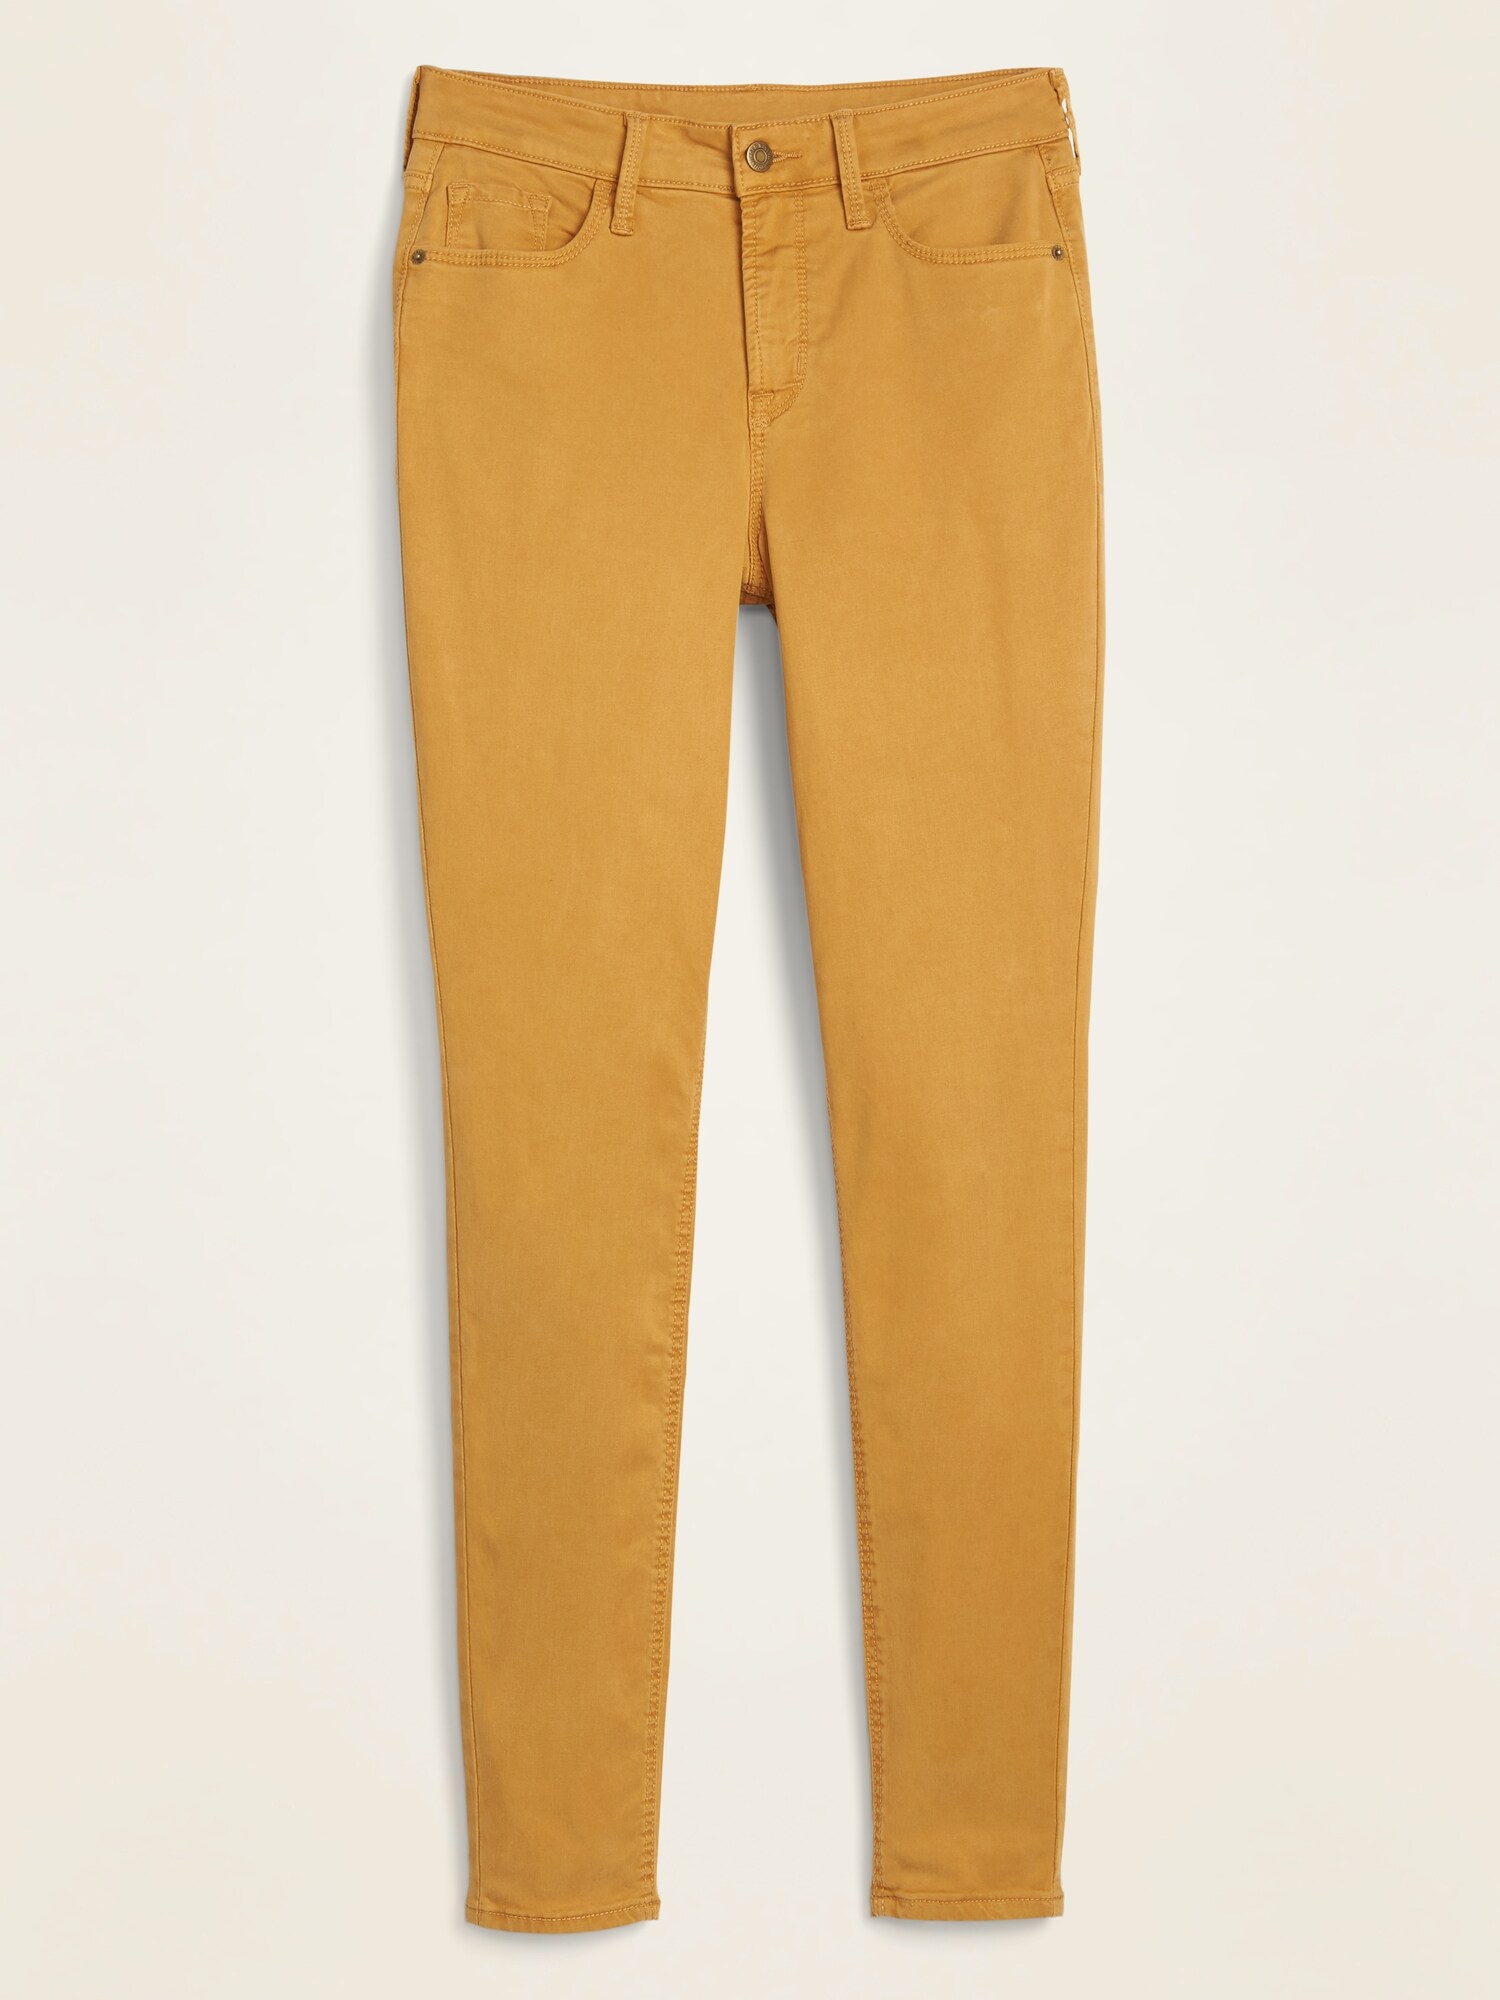 High-Waisted Sateen Rockstar Super Skinny Jeans for Women | Old Navy